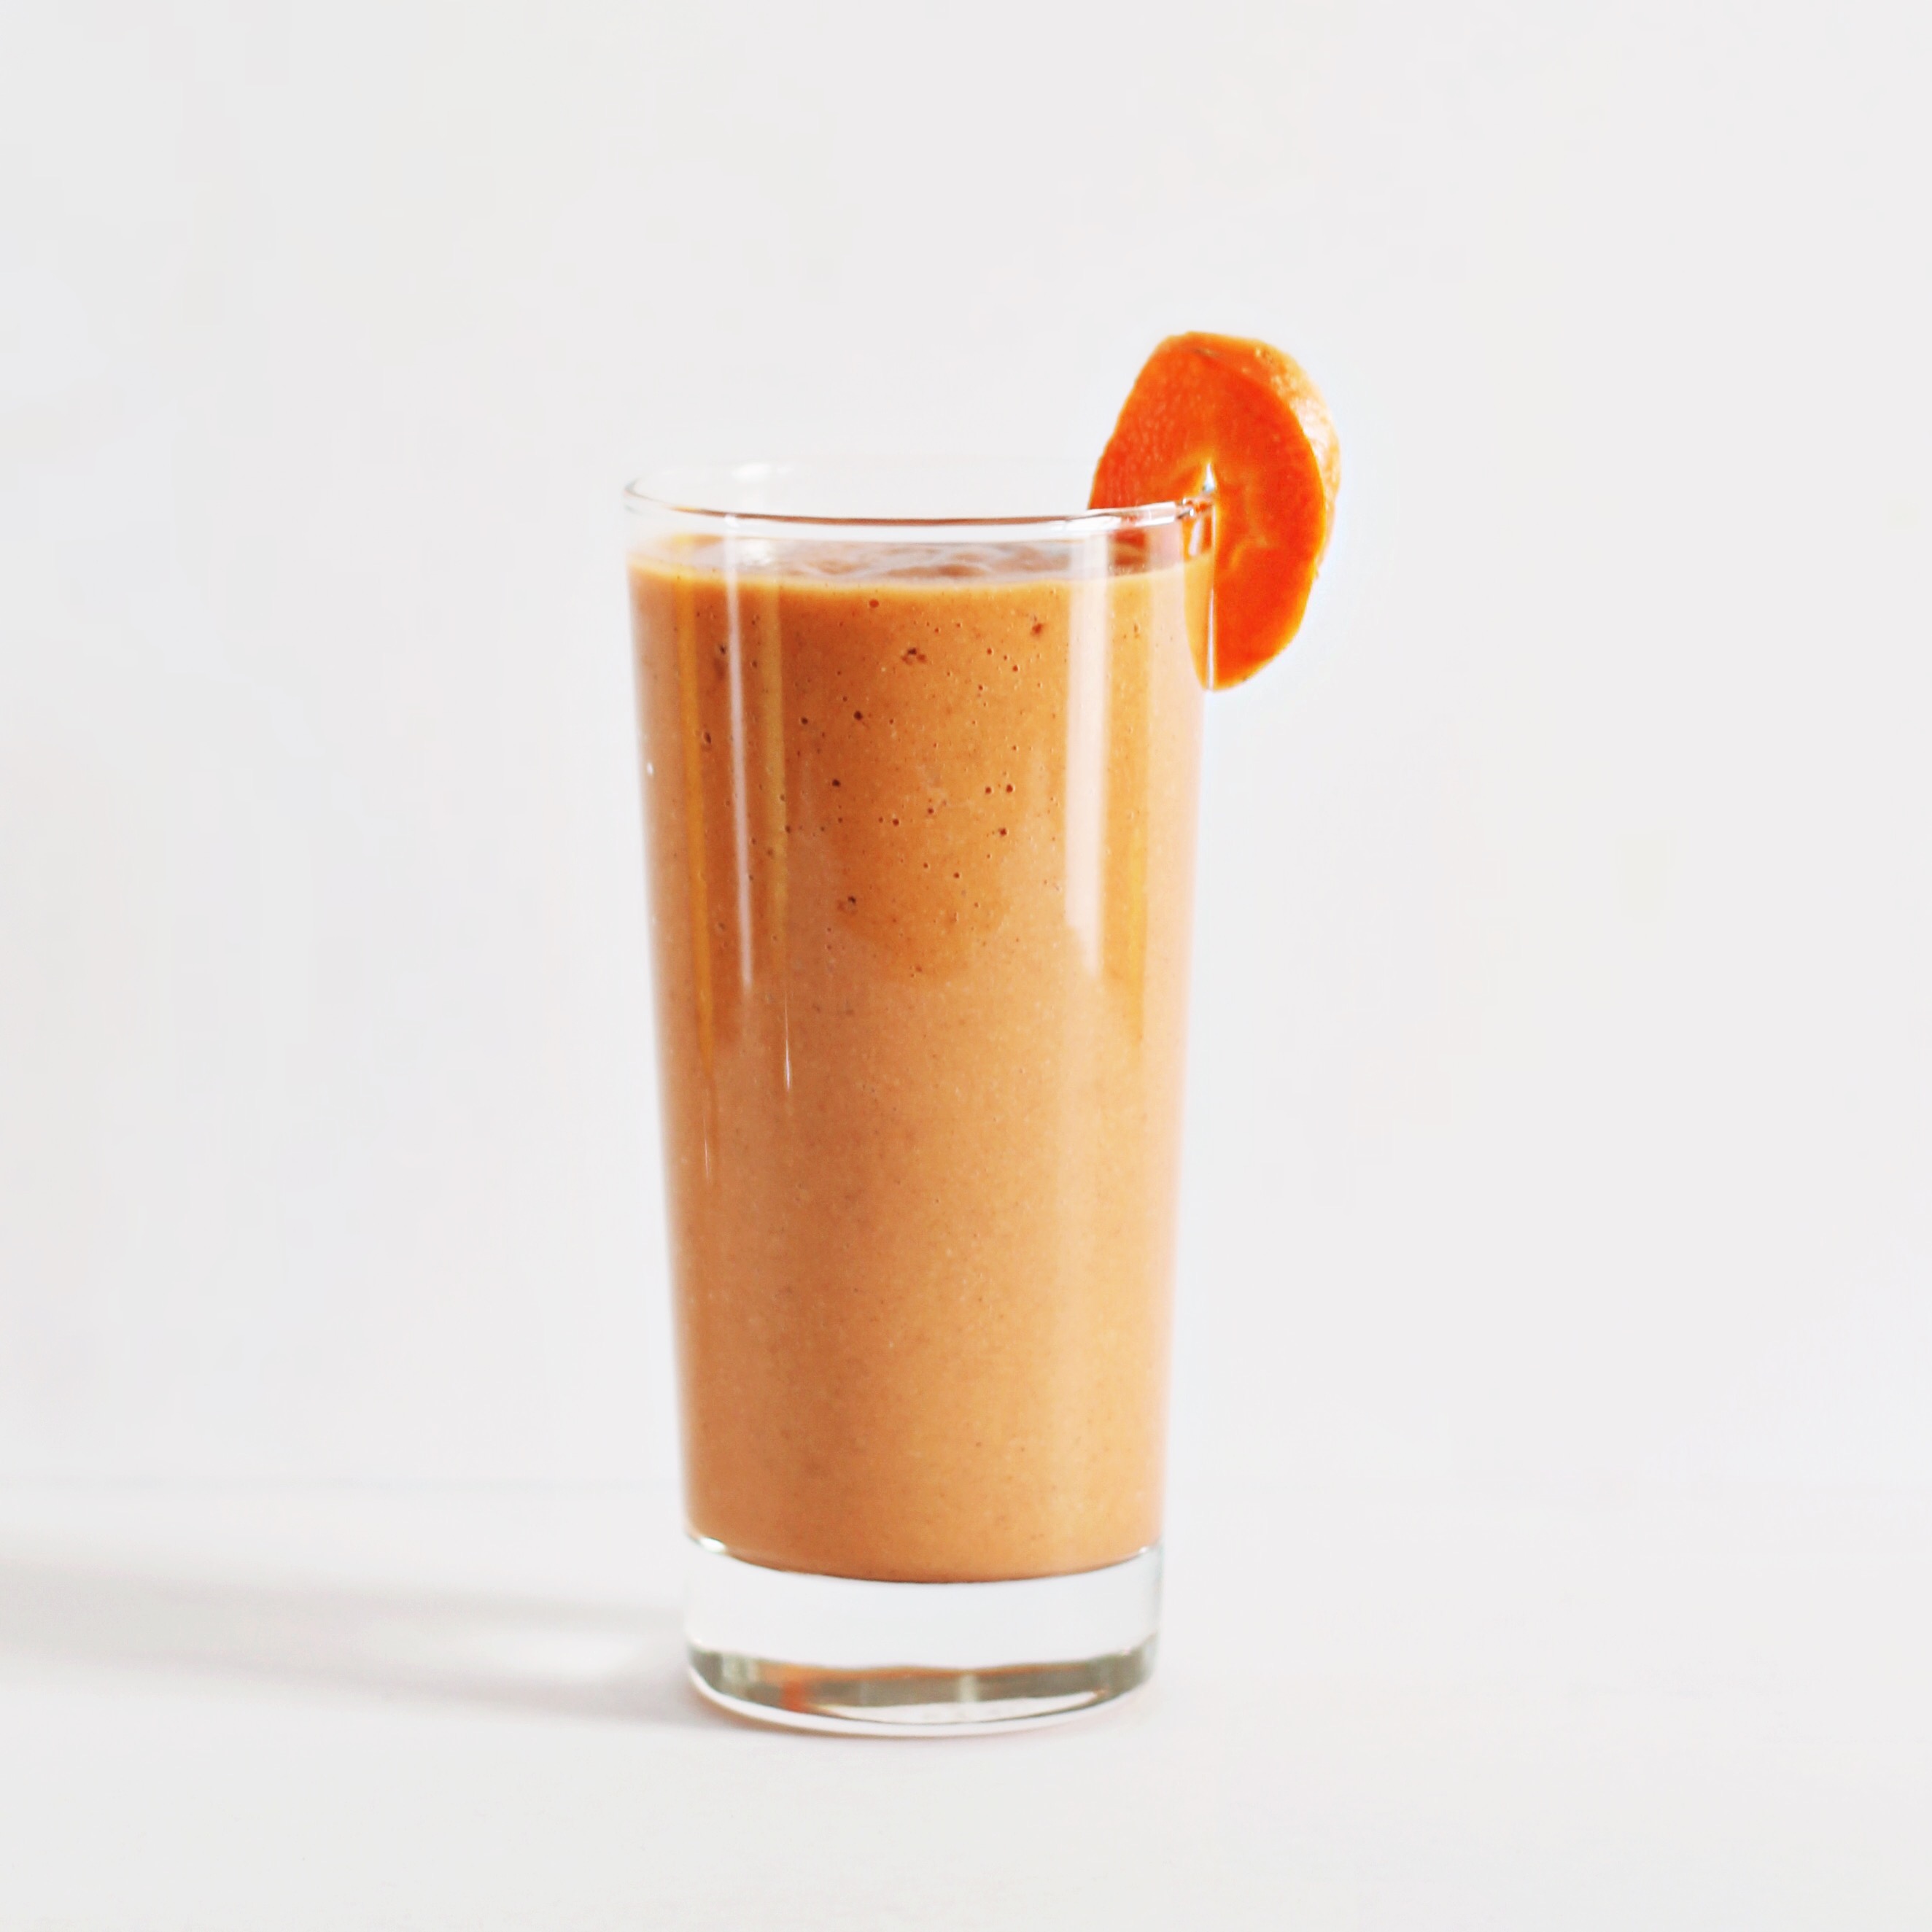 Carrot Cake Smoothie 10 Day Smoothie Challenge II